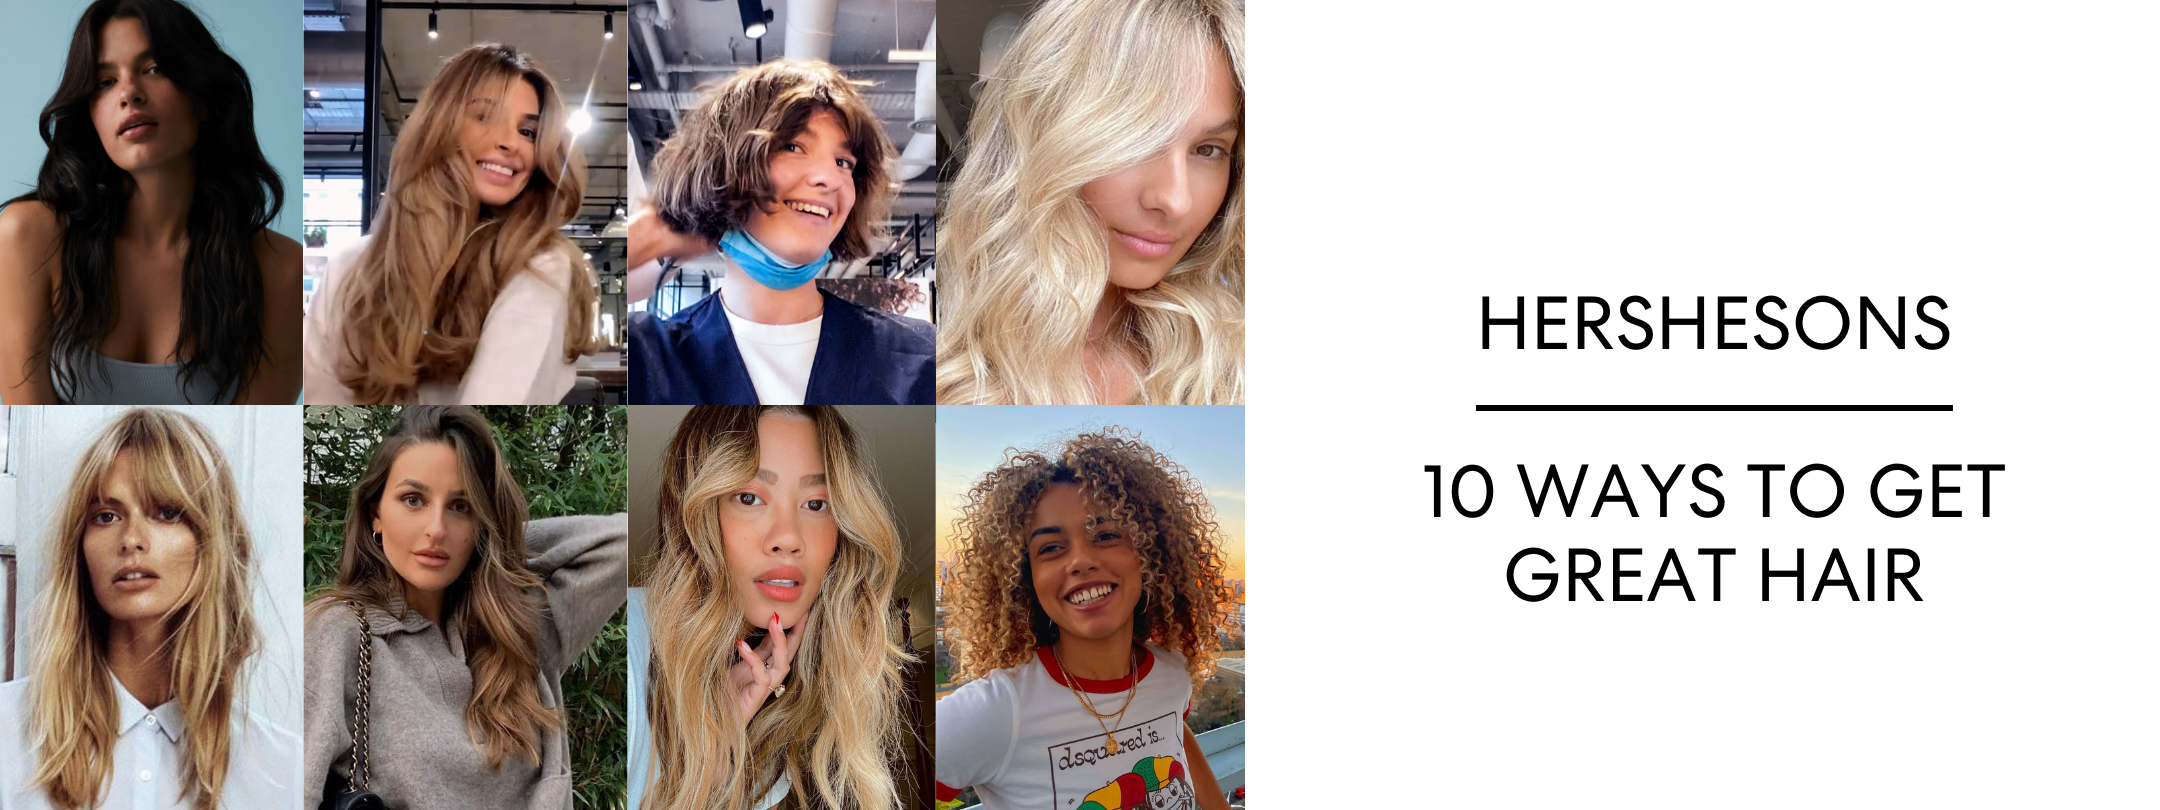 10 WAYS TO GET GREAT HAIR